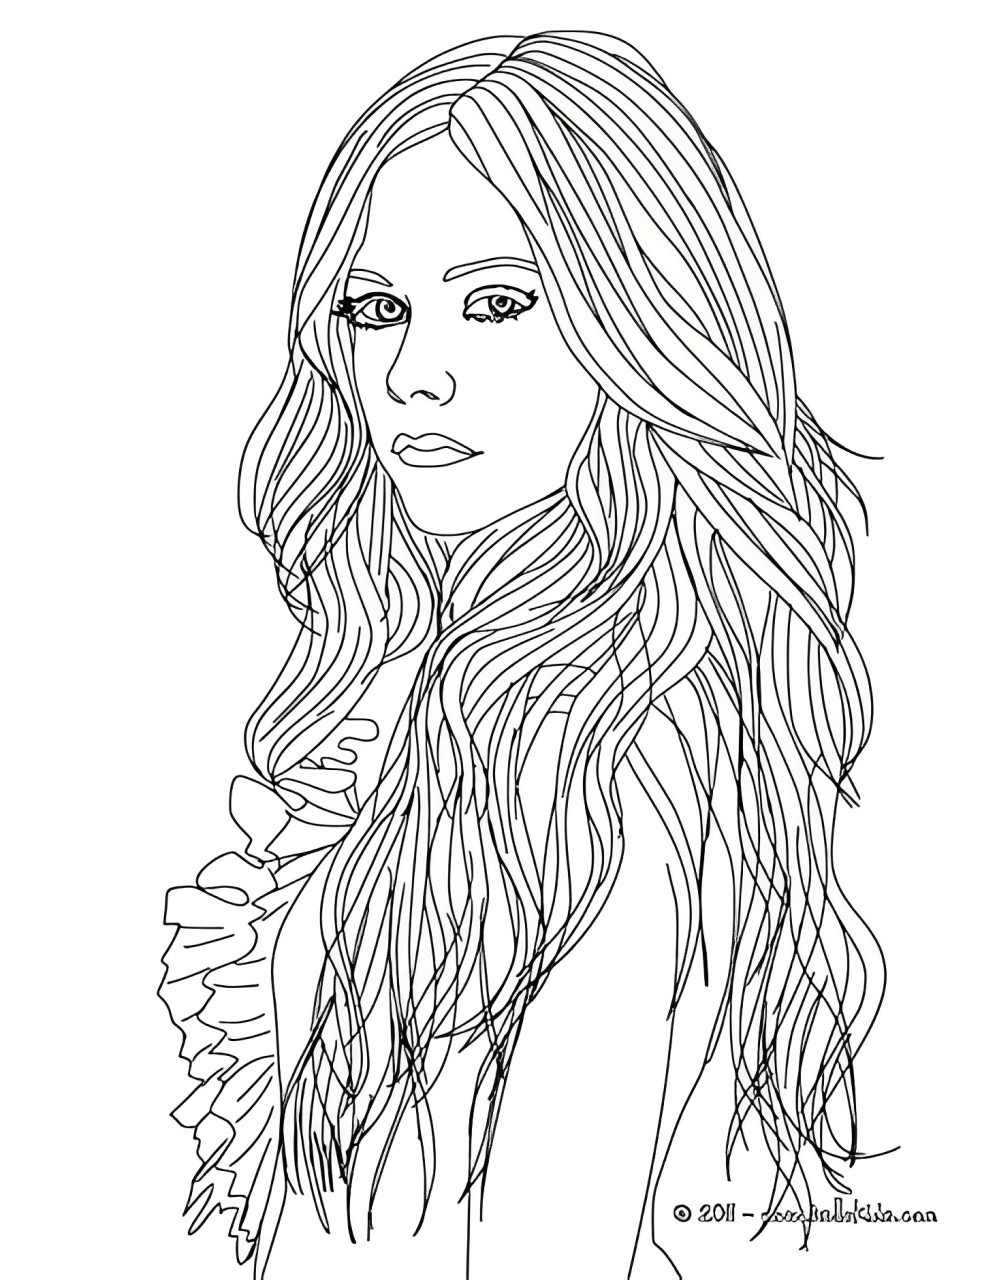 Famous People Coloring Pages Online For Kids!